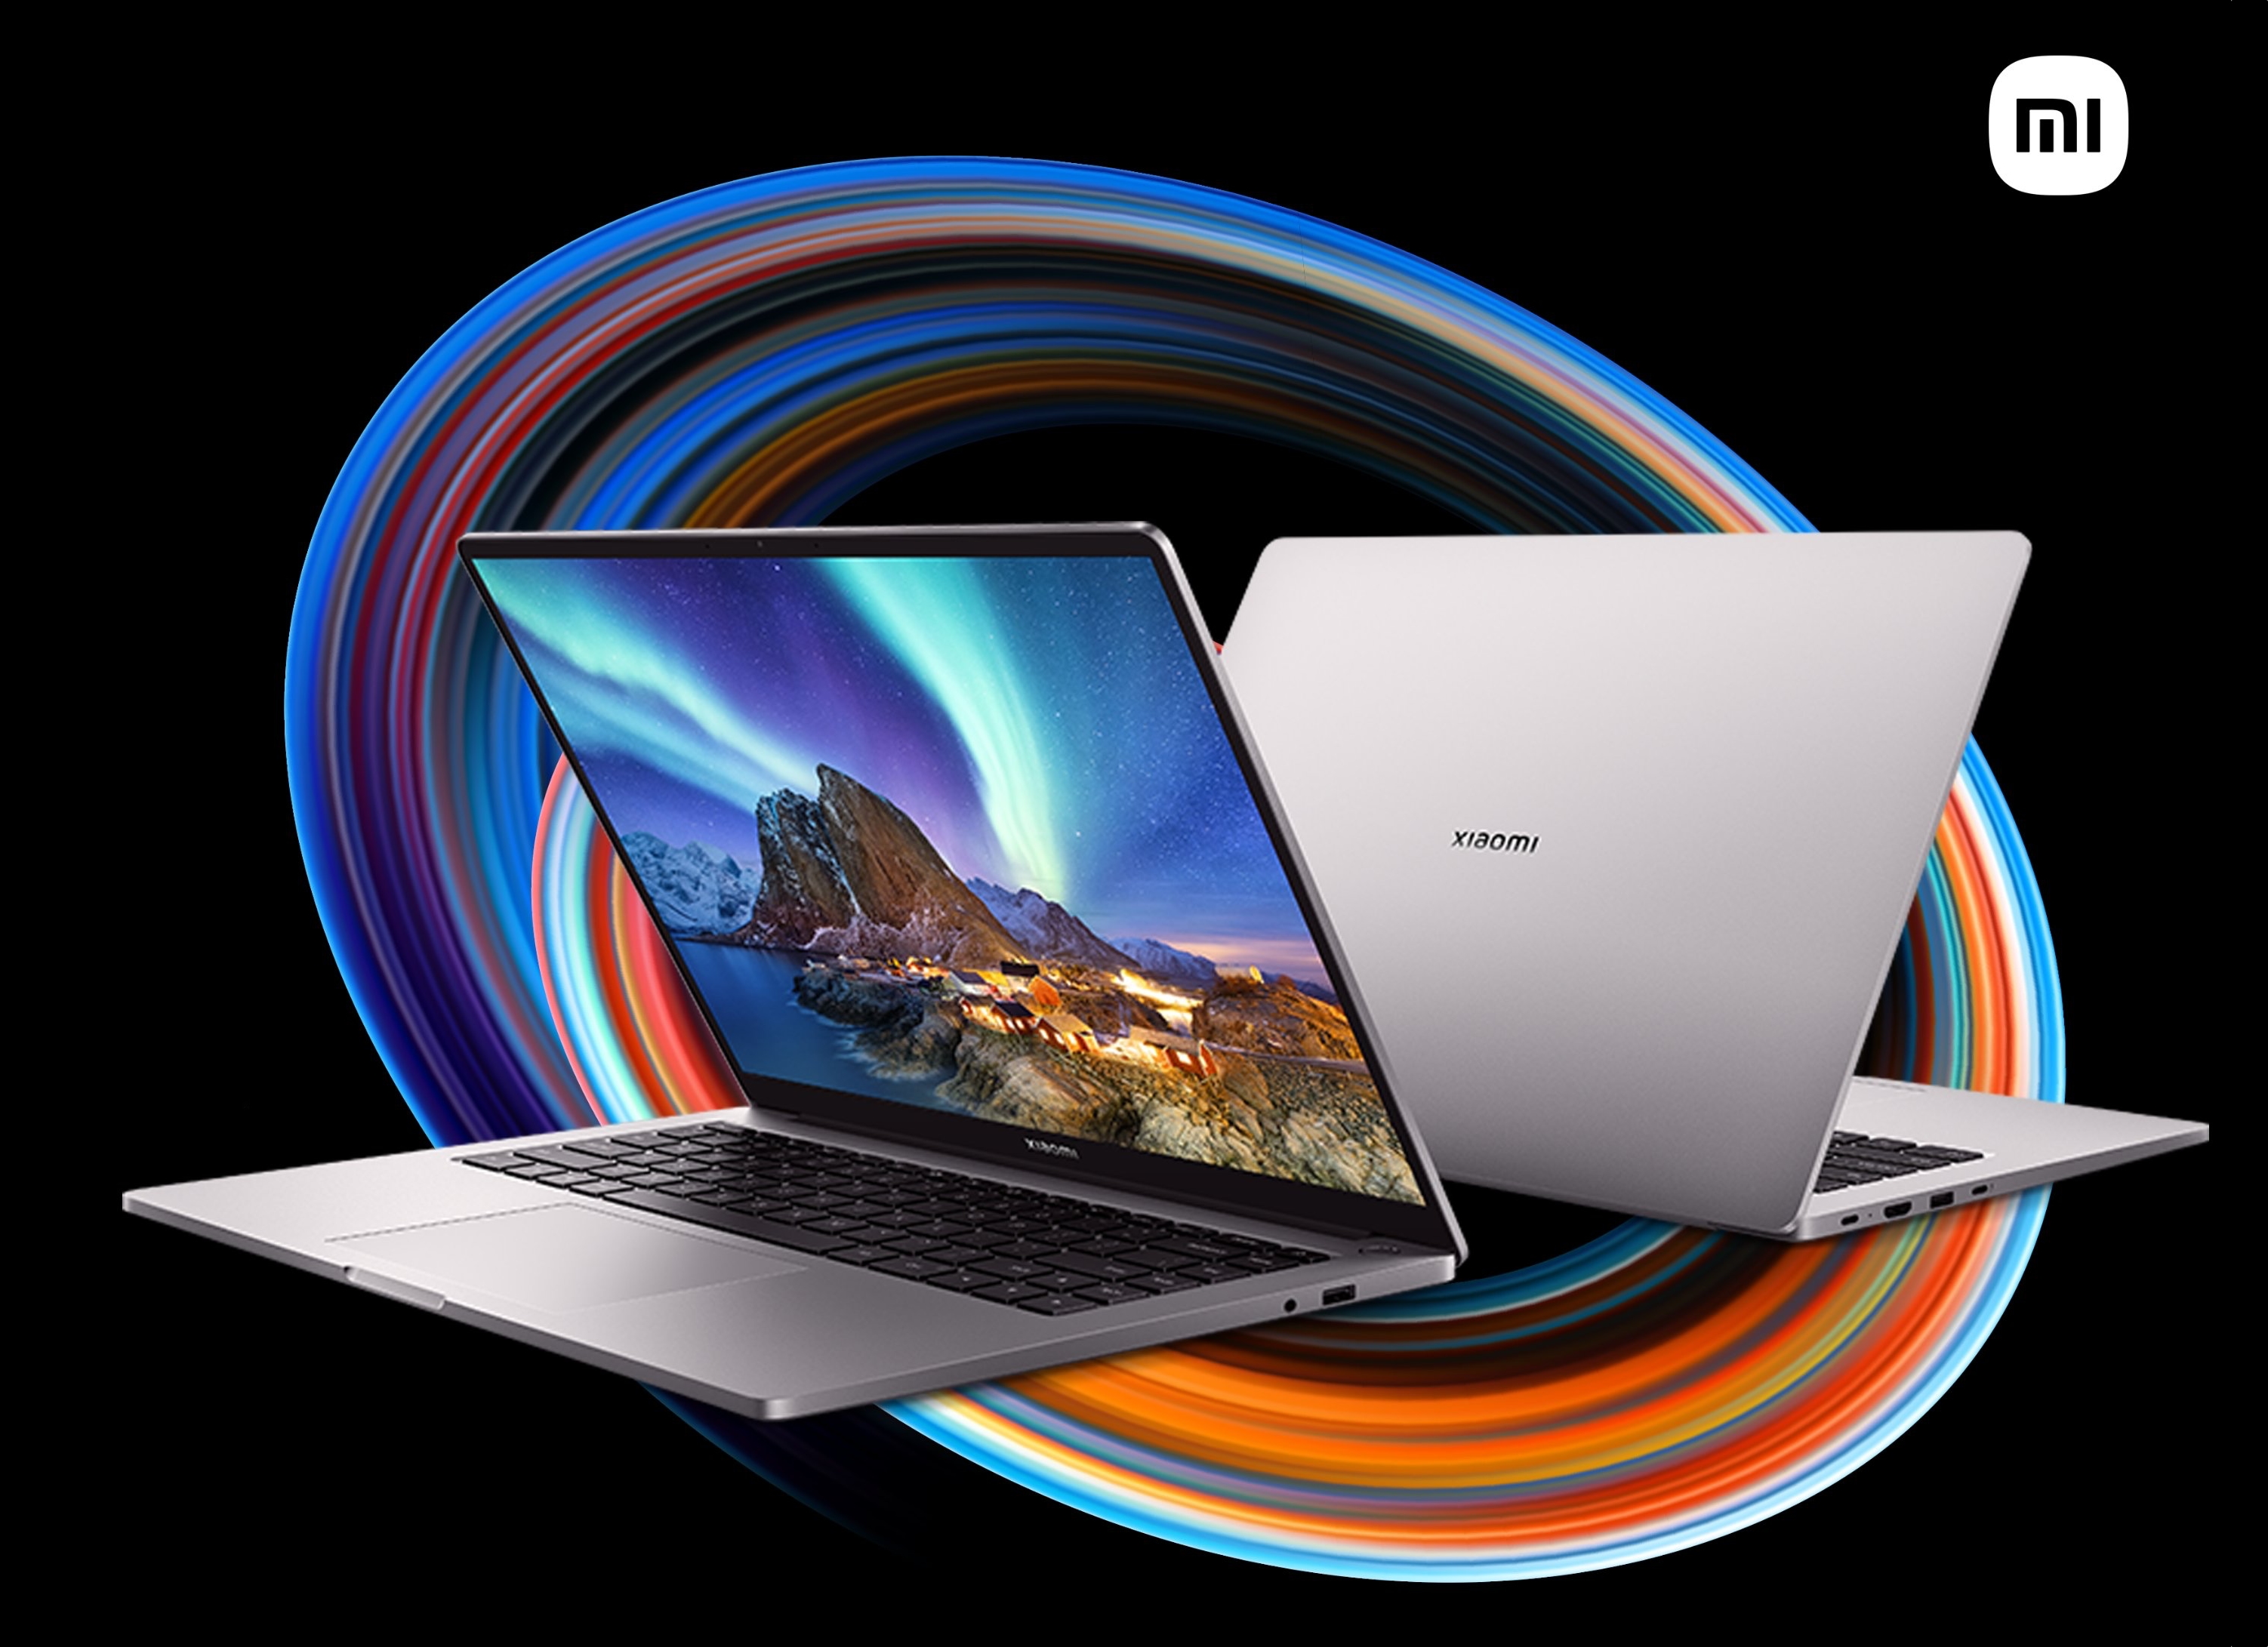 Xiaomi unveiled Mi Notebook Pro and Mi Notebook Ultra: laptops with 11th generation Intel chips, 16 GB RAM, 65W charging and price starting from $768